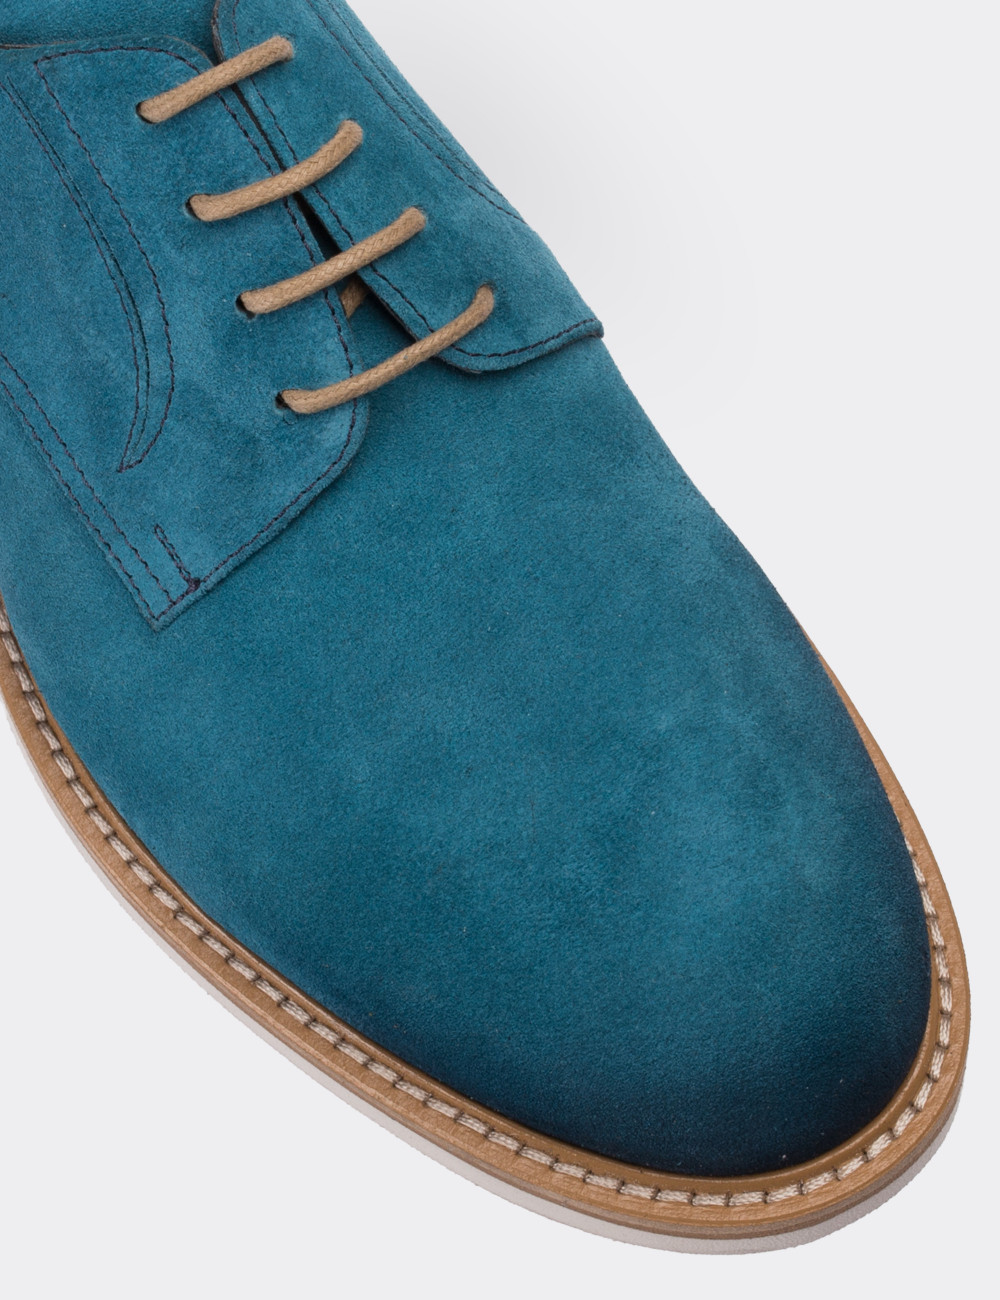 Blue Suede Leather Lace-up Shoes - 01294MMVIE01